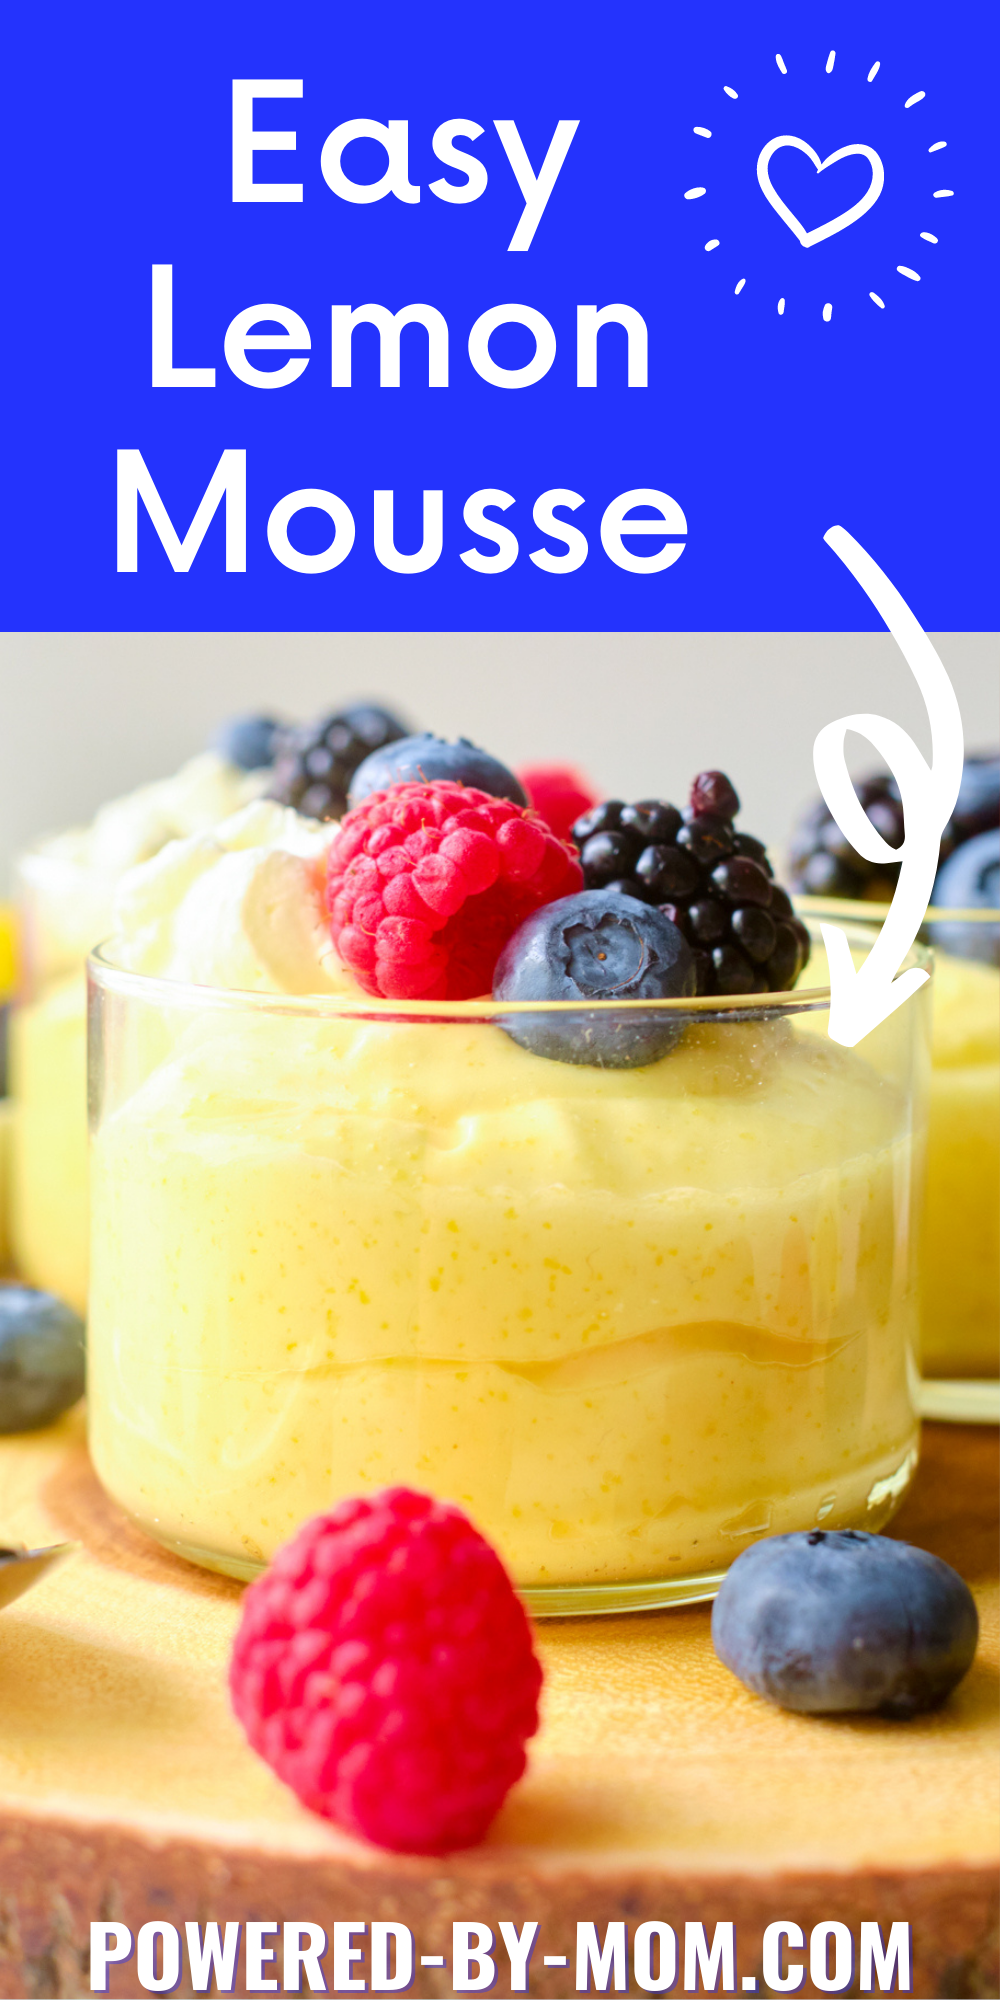 This Lemon Mousse is made with only three ingredients and can be whipped up in just a few minutes. You'll want to let it set in the fridge for a few hours but it's totally worth the wait. It's a tangy meets sweet and refreshing no-bake summer dessert that will impress your guests and is beyond delicious, yet SO easy to make. Top with fresh berries and it's a dreamy dessert that is bound to impress.